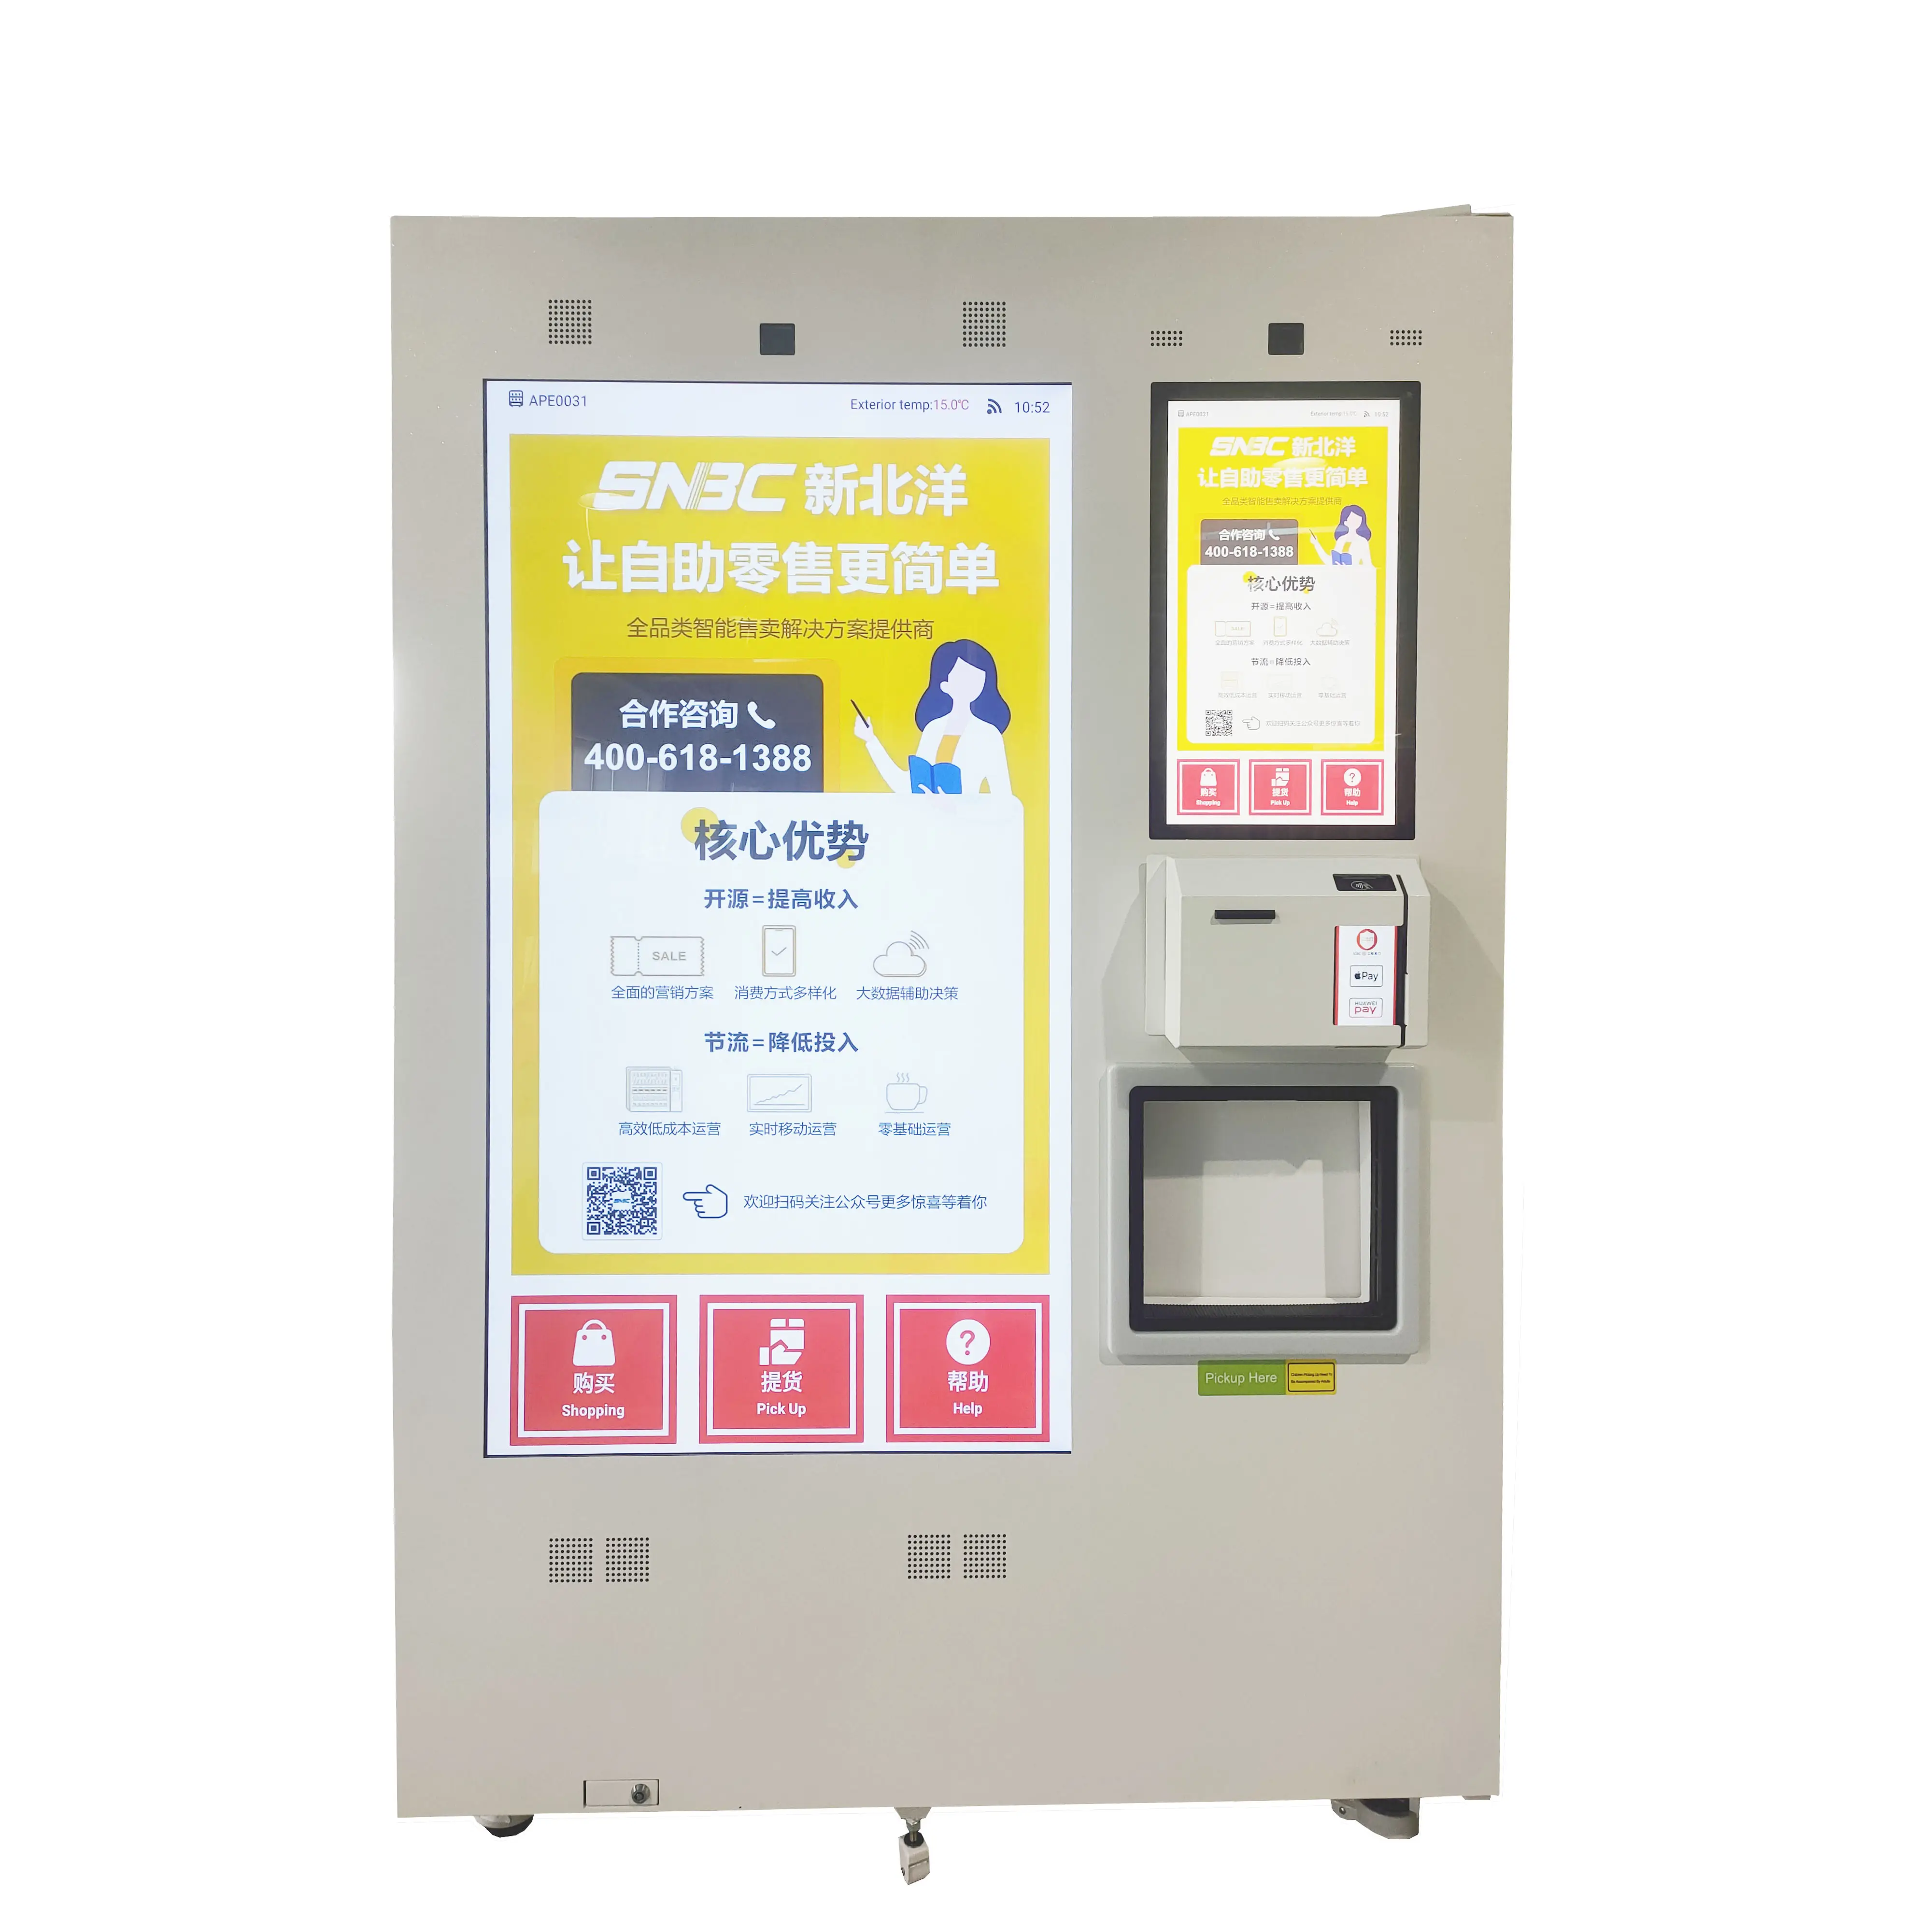 SNBC Toy Vending Machine Automatic refrigerated robot arm vending machine with video booth